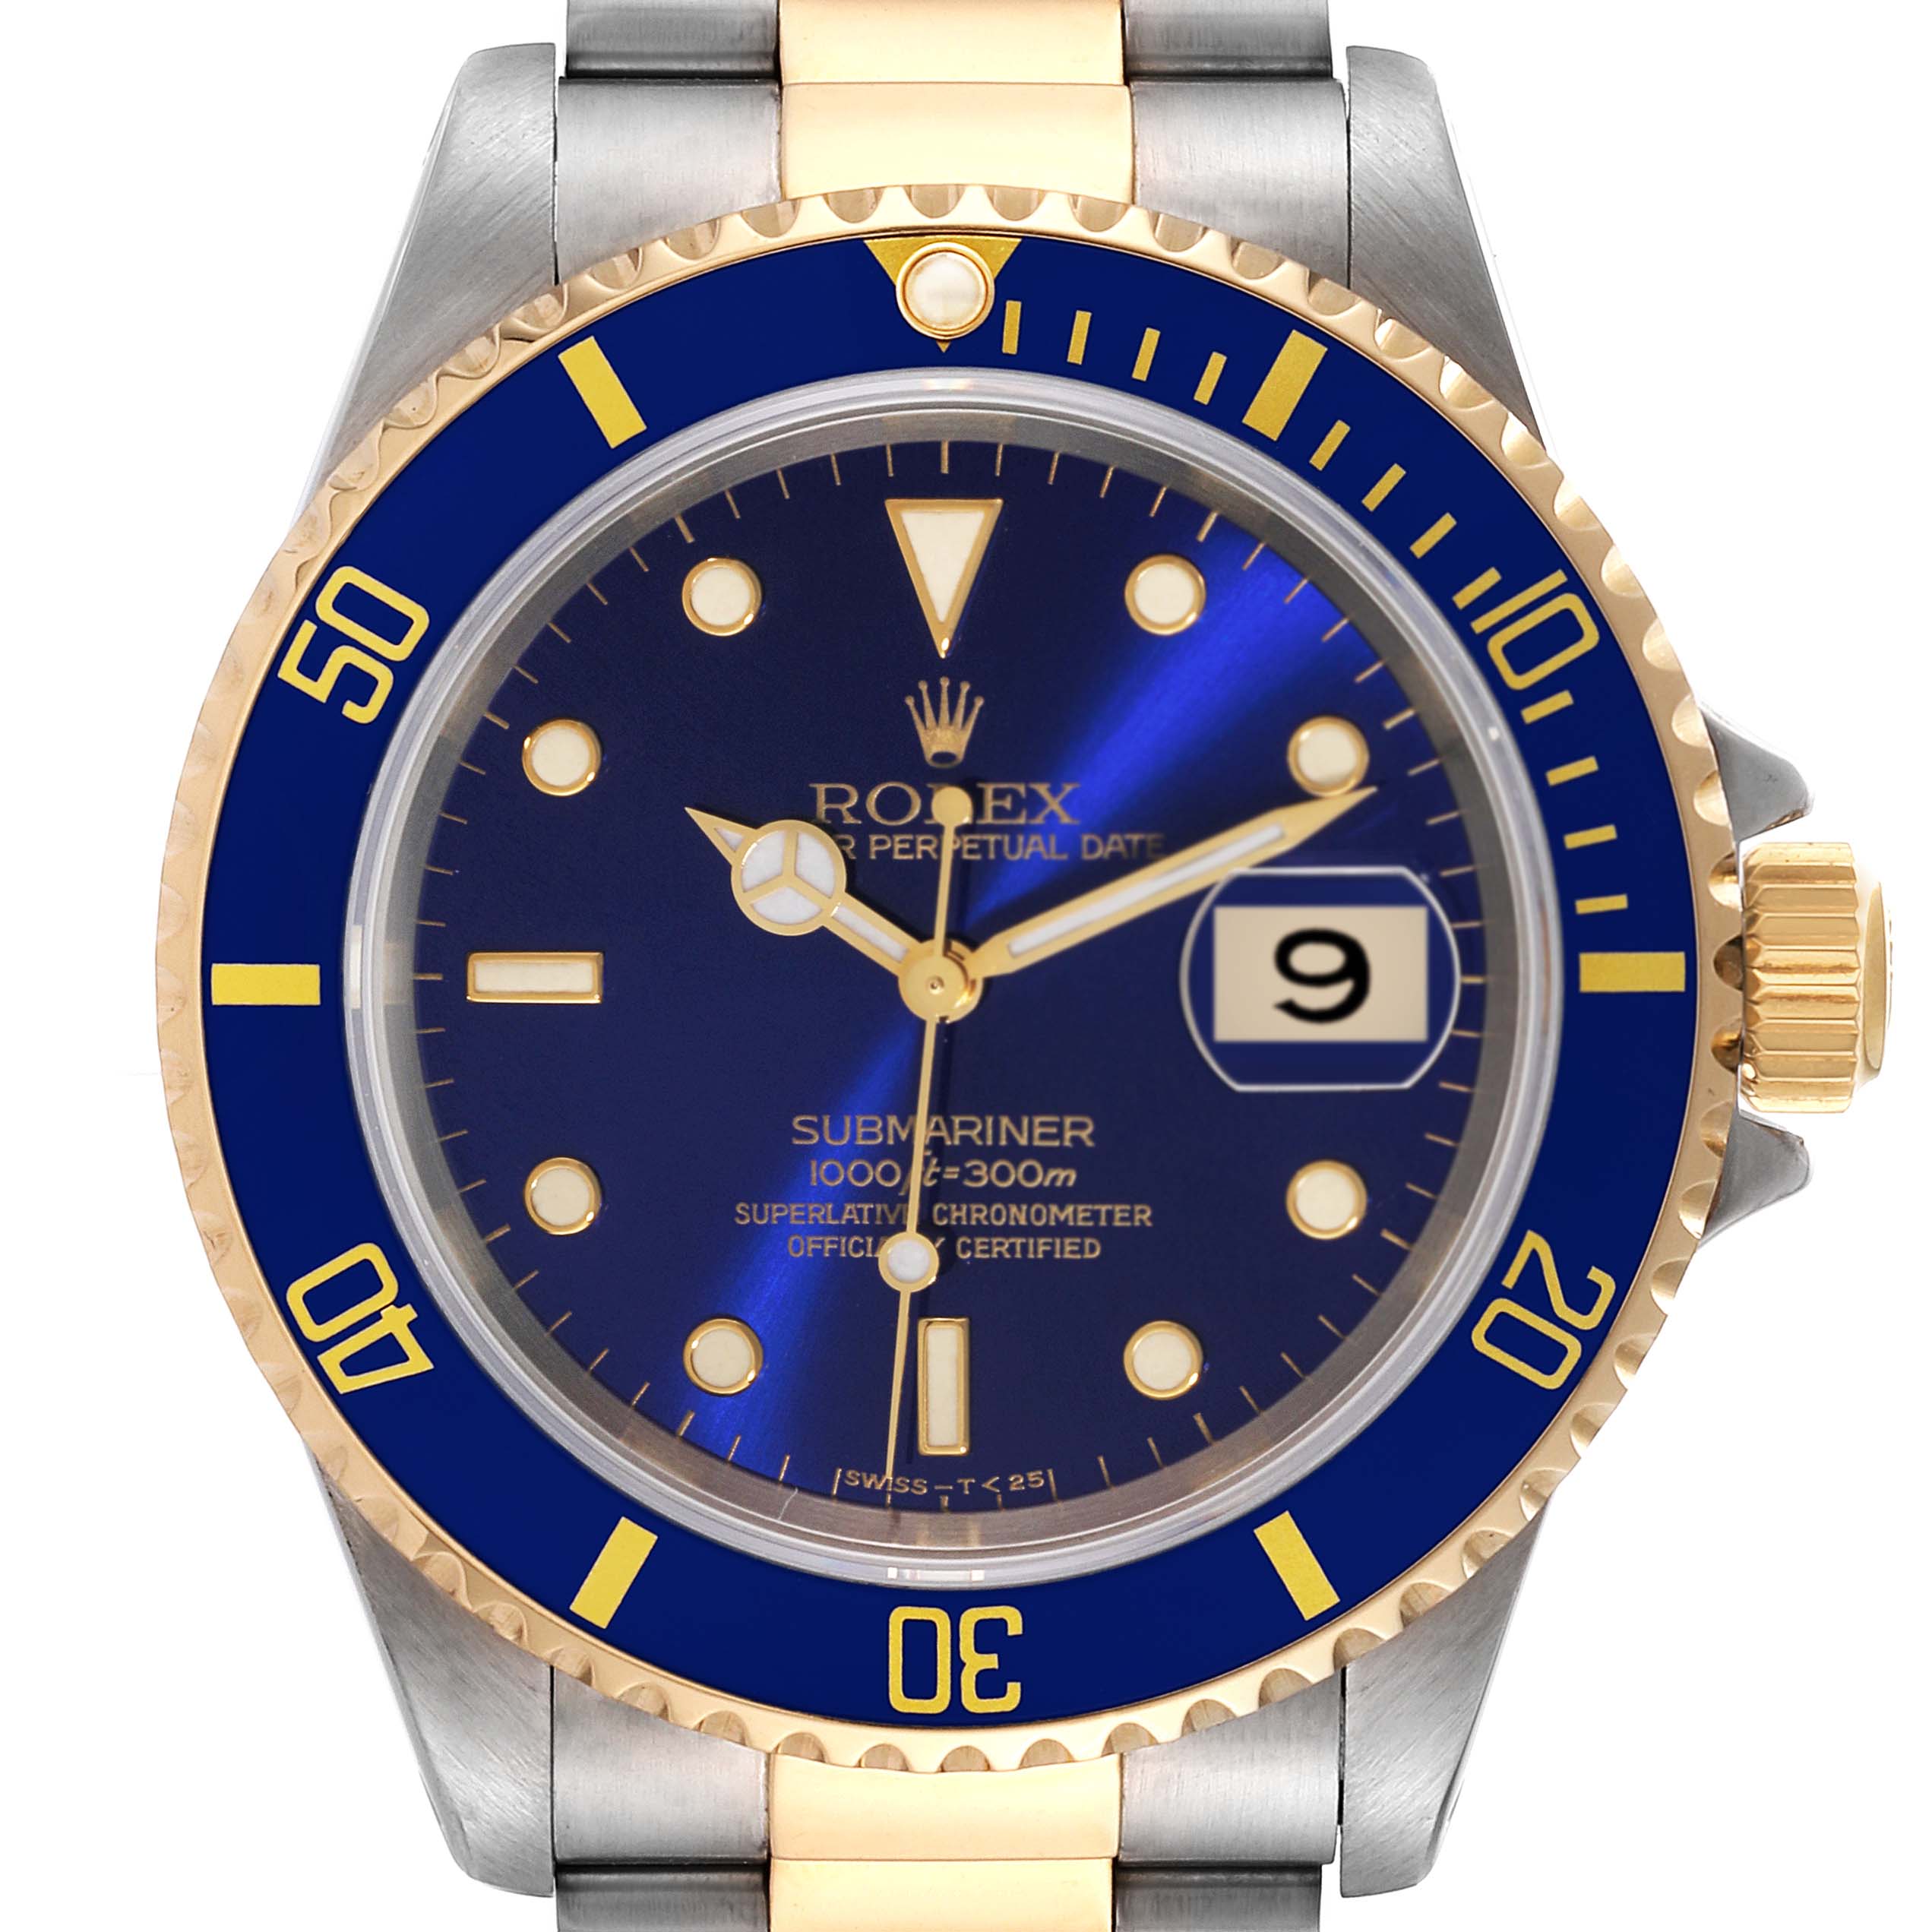 Rolex Submariner Blue Dial Steel Yellow Gold Mens Watch 16613